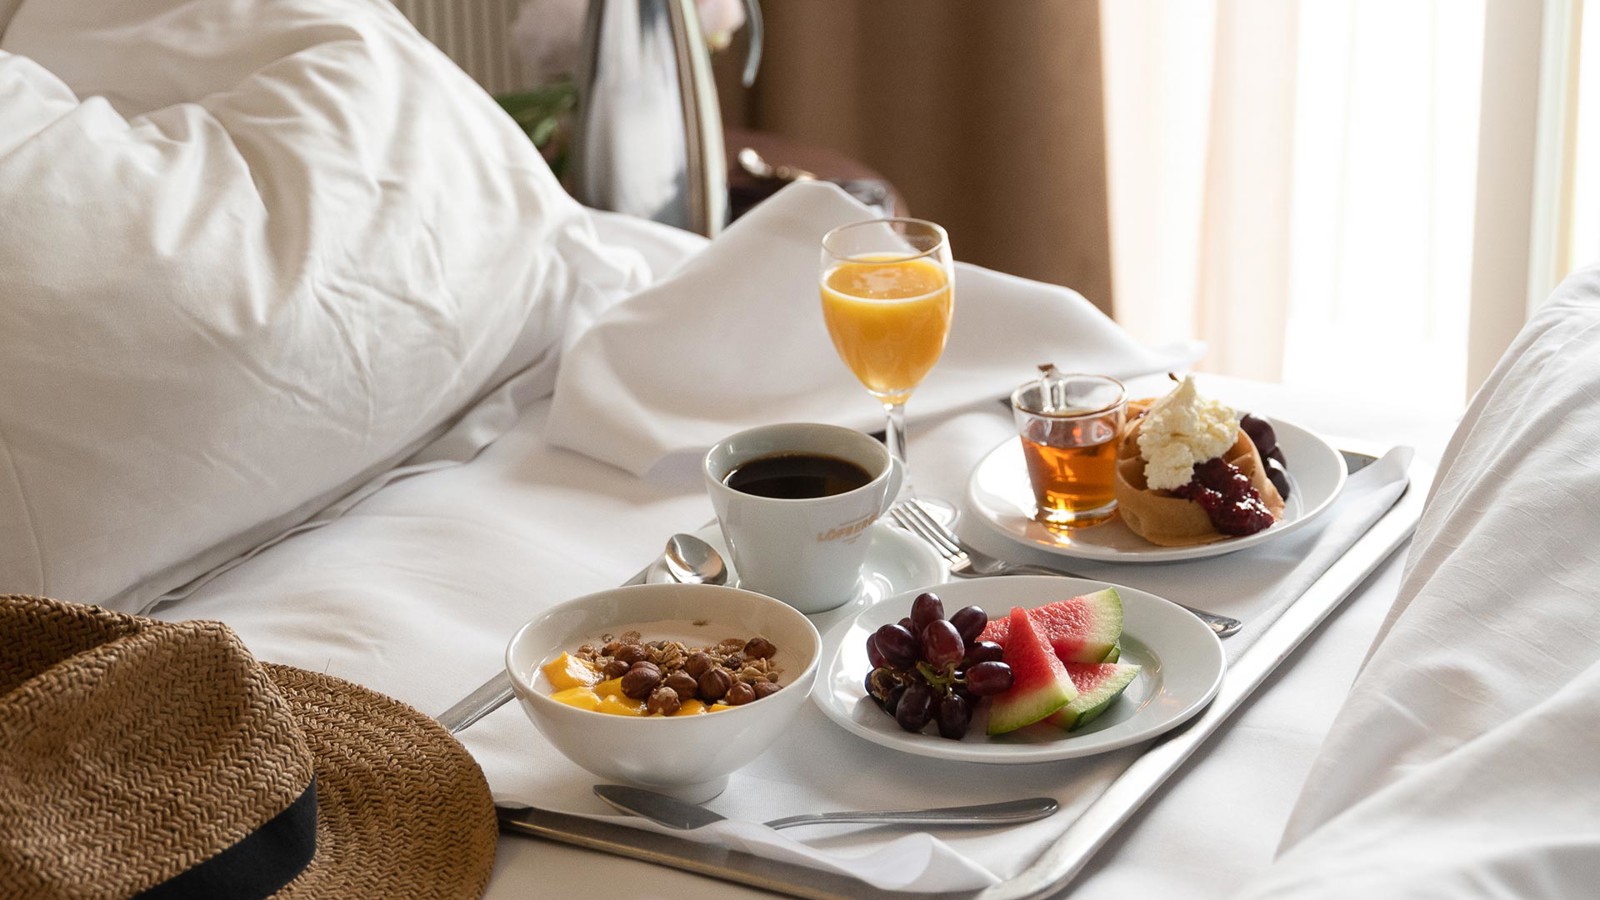 Breakfast tray laid out in a bed and with a straw hat in the foreground